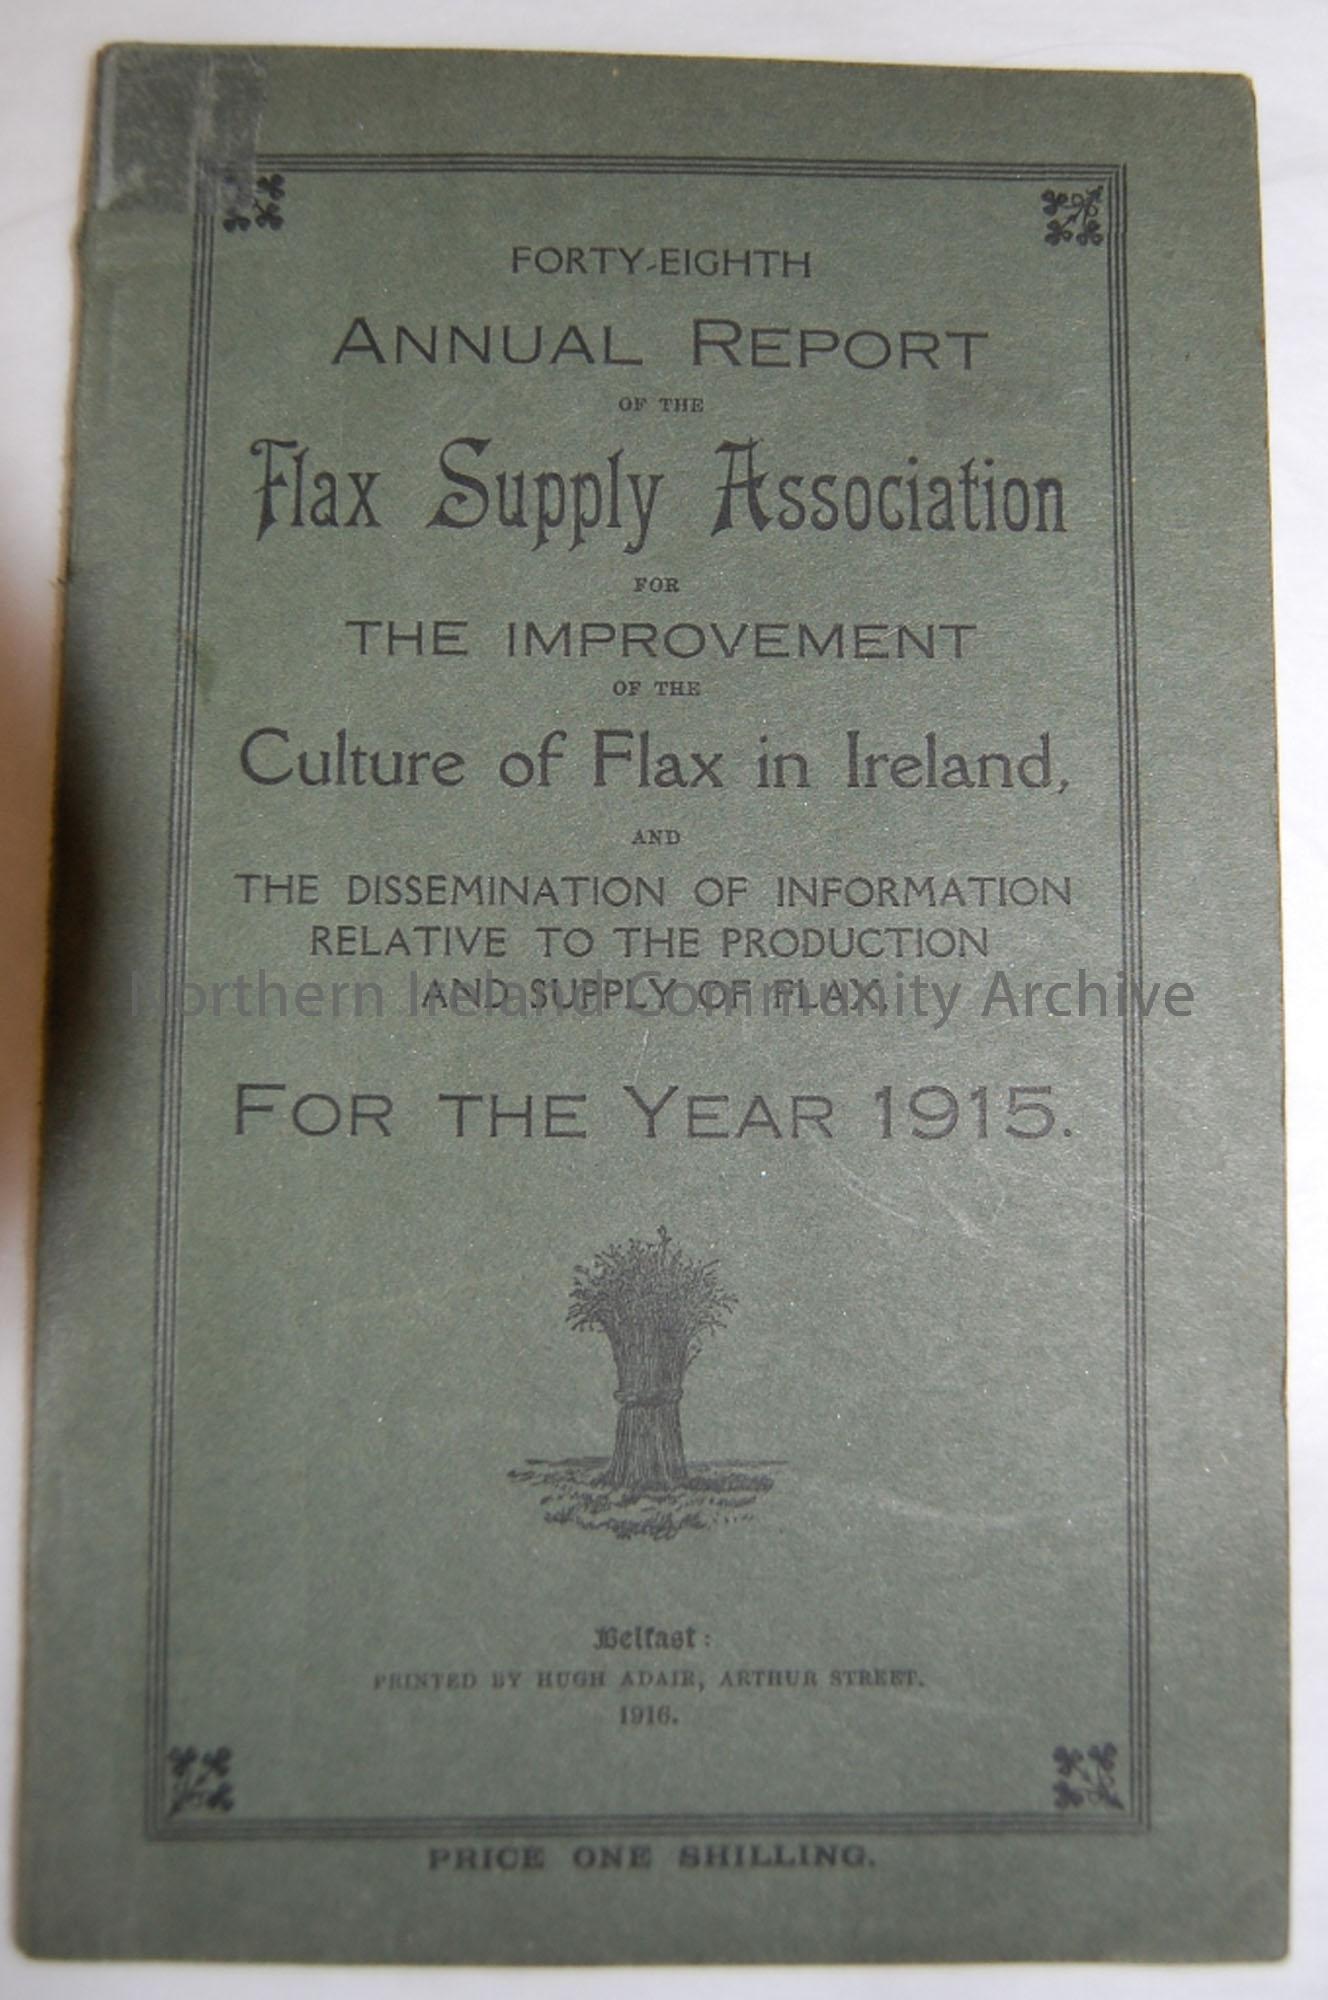 ’48th Annual Report of the Flax Supply Association for the Improvement of the Culture of Flax in Ireland…for the year 1915′ printed in Belfast by Hu…